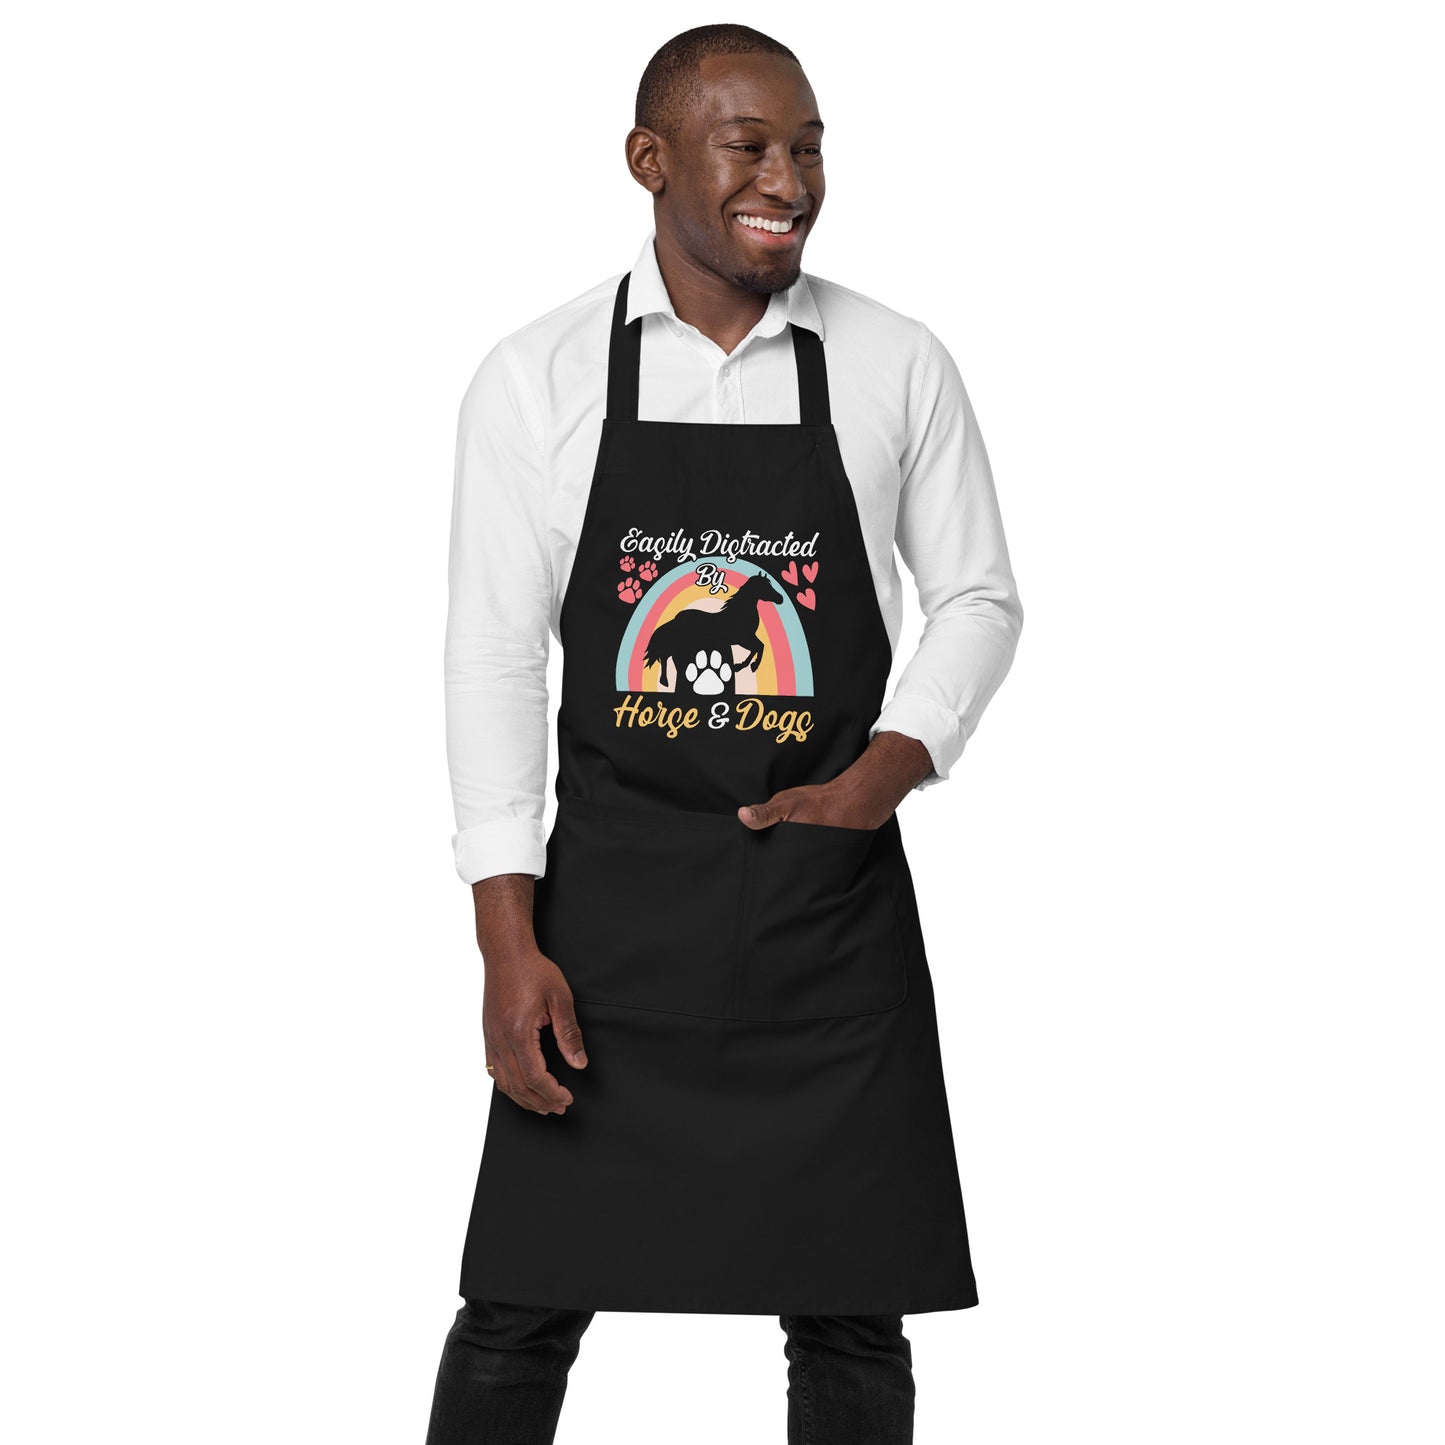 Easily Distracted by Horse & Dogs Organic cotton apron